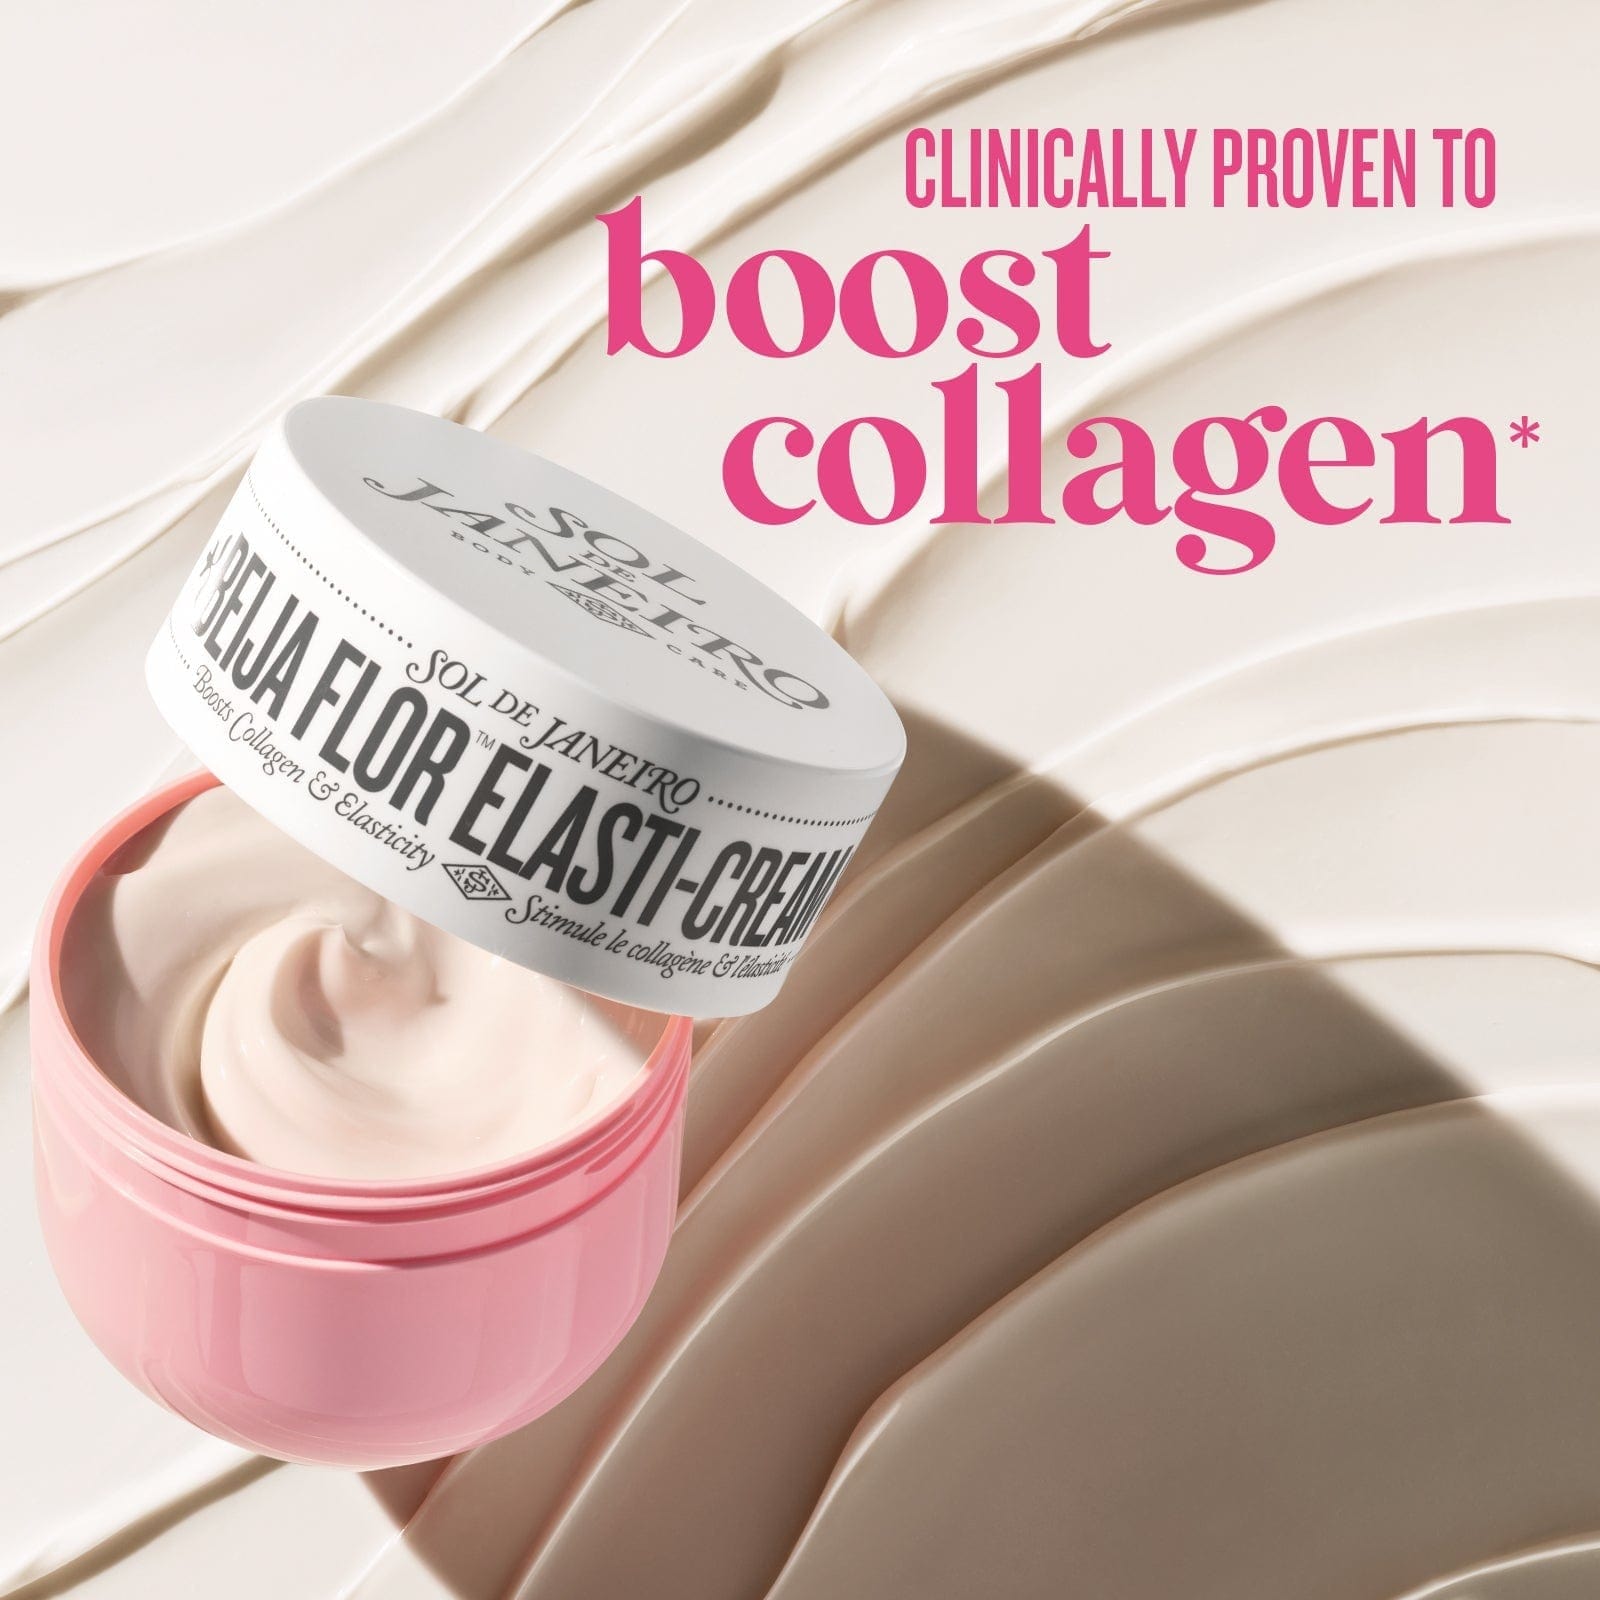 Clinically proven to boost collagen*